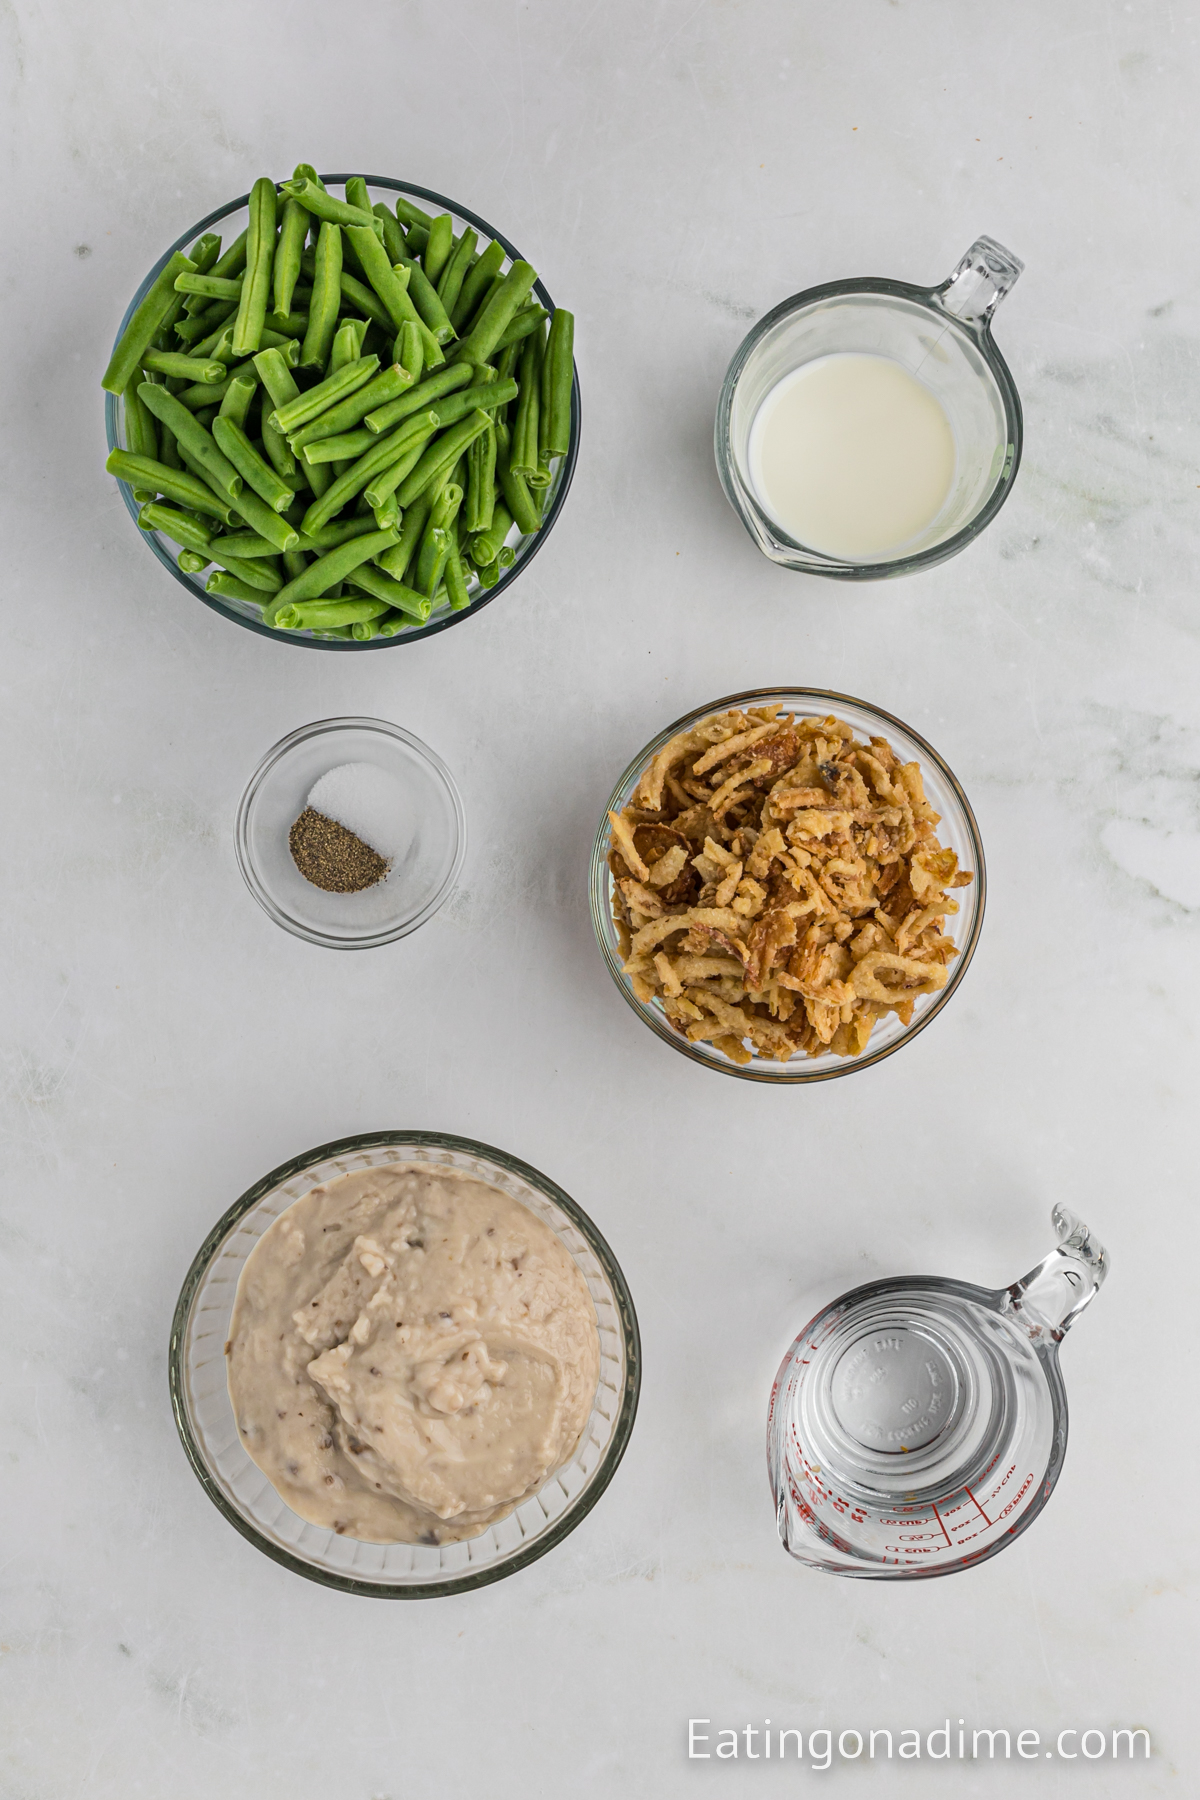 Ingredients needed - green beans, water, cream of mushroom soup, milk, salt and pepper, french fried onions